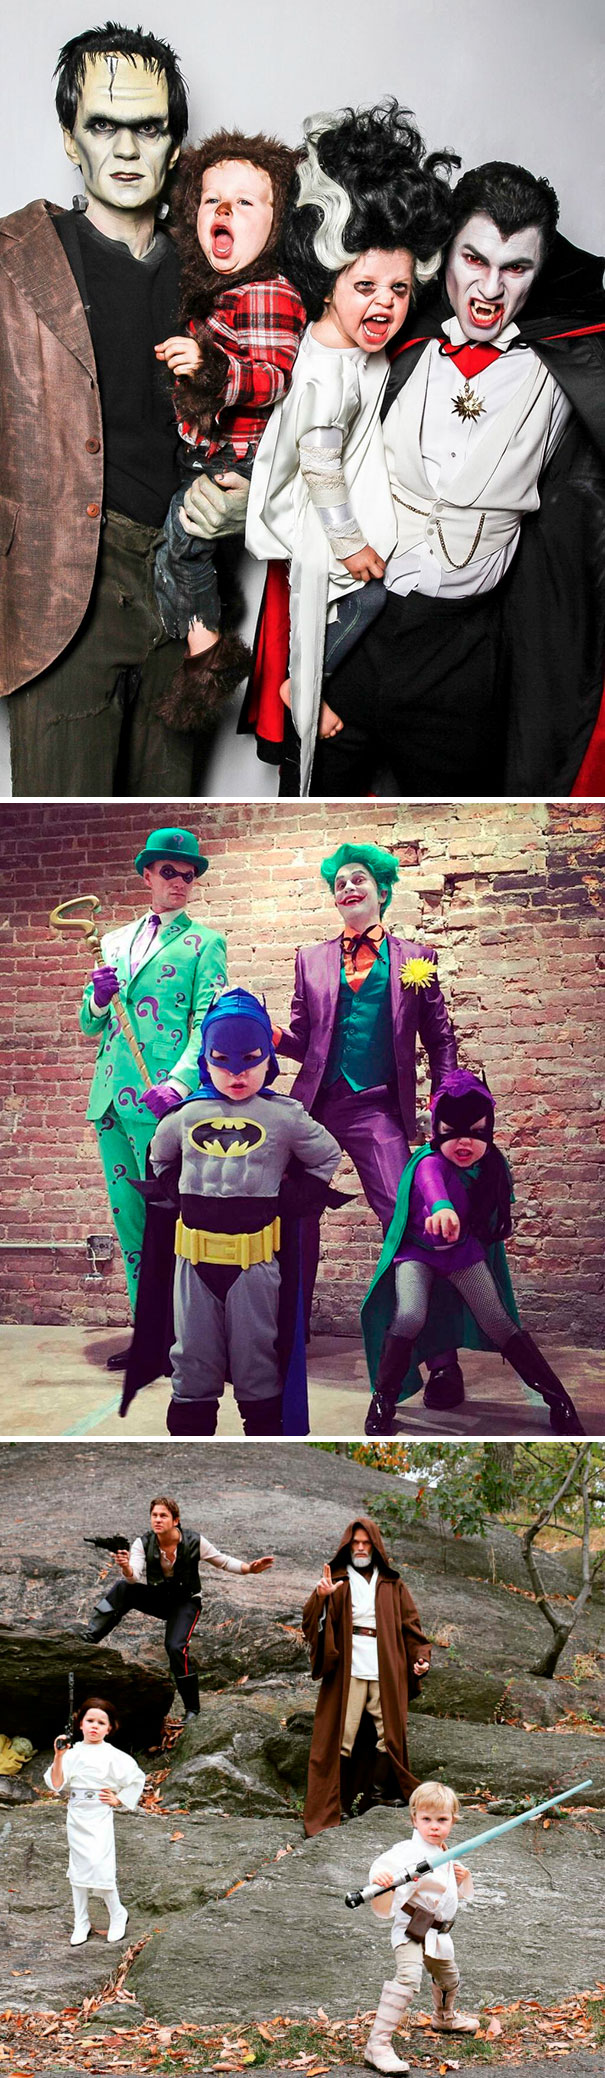 Neil Patrick Harris And His Family Have, Over The Last Few Years, Become The Undisputed Champions Of Halloween Costumes